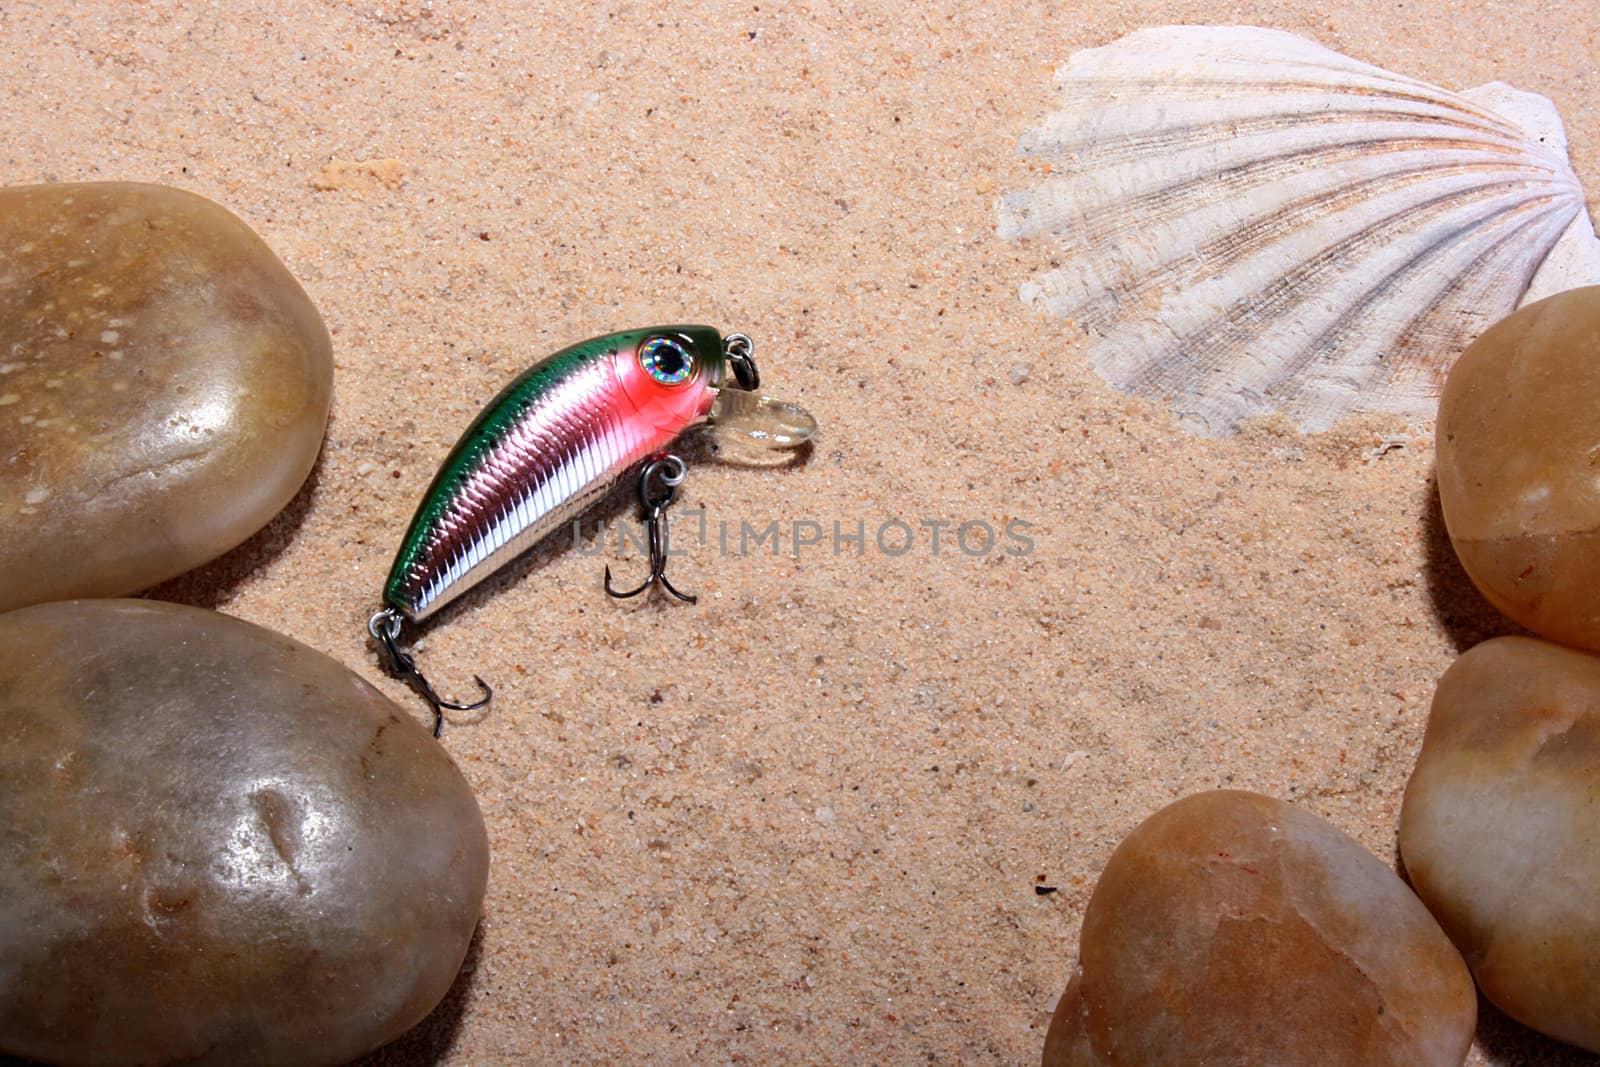 Artificial small fish - a bait for fishing in the rivers, the seas and lakes on sand with a cockleshell and pebbles.